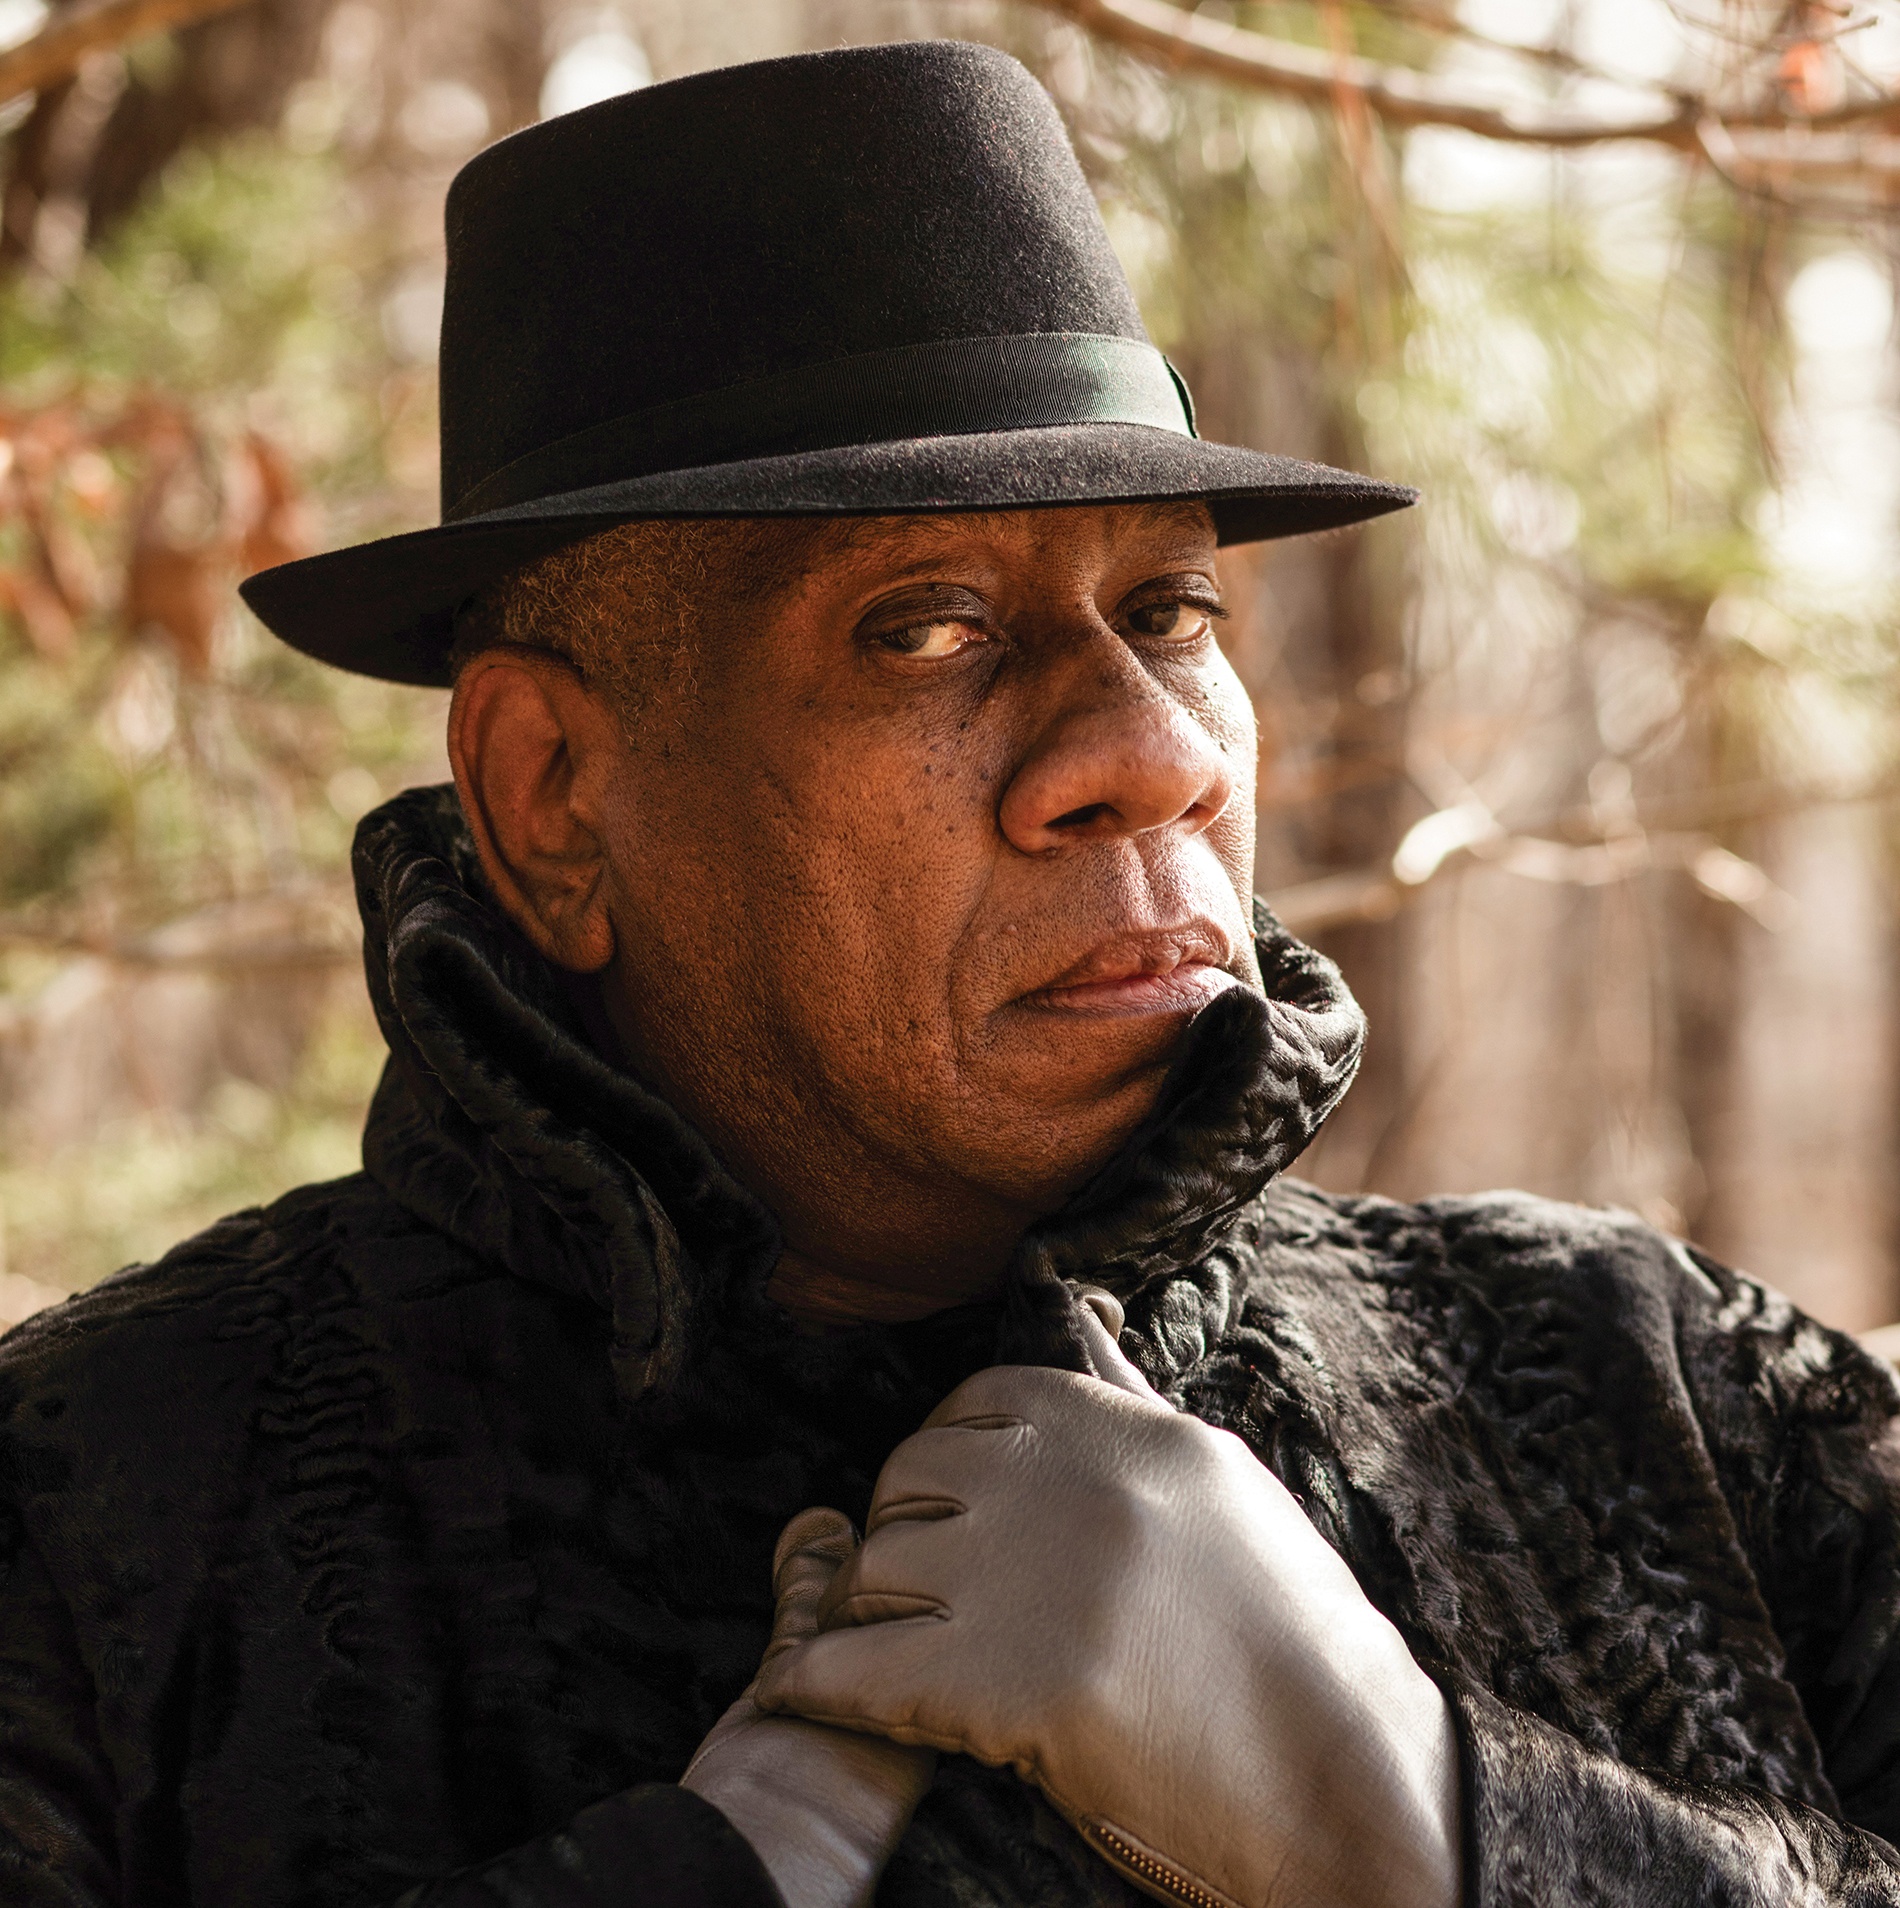 Andre Leon Talley on 'The Gospel According to Andre' Documentary